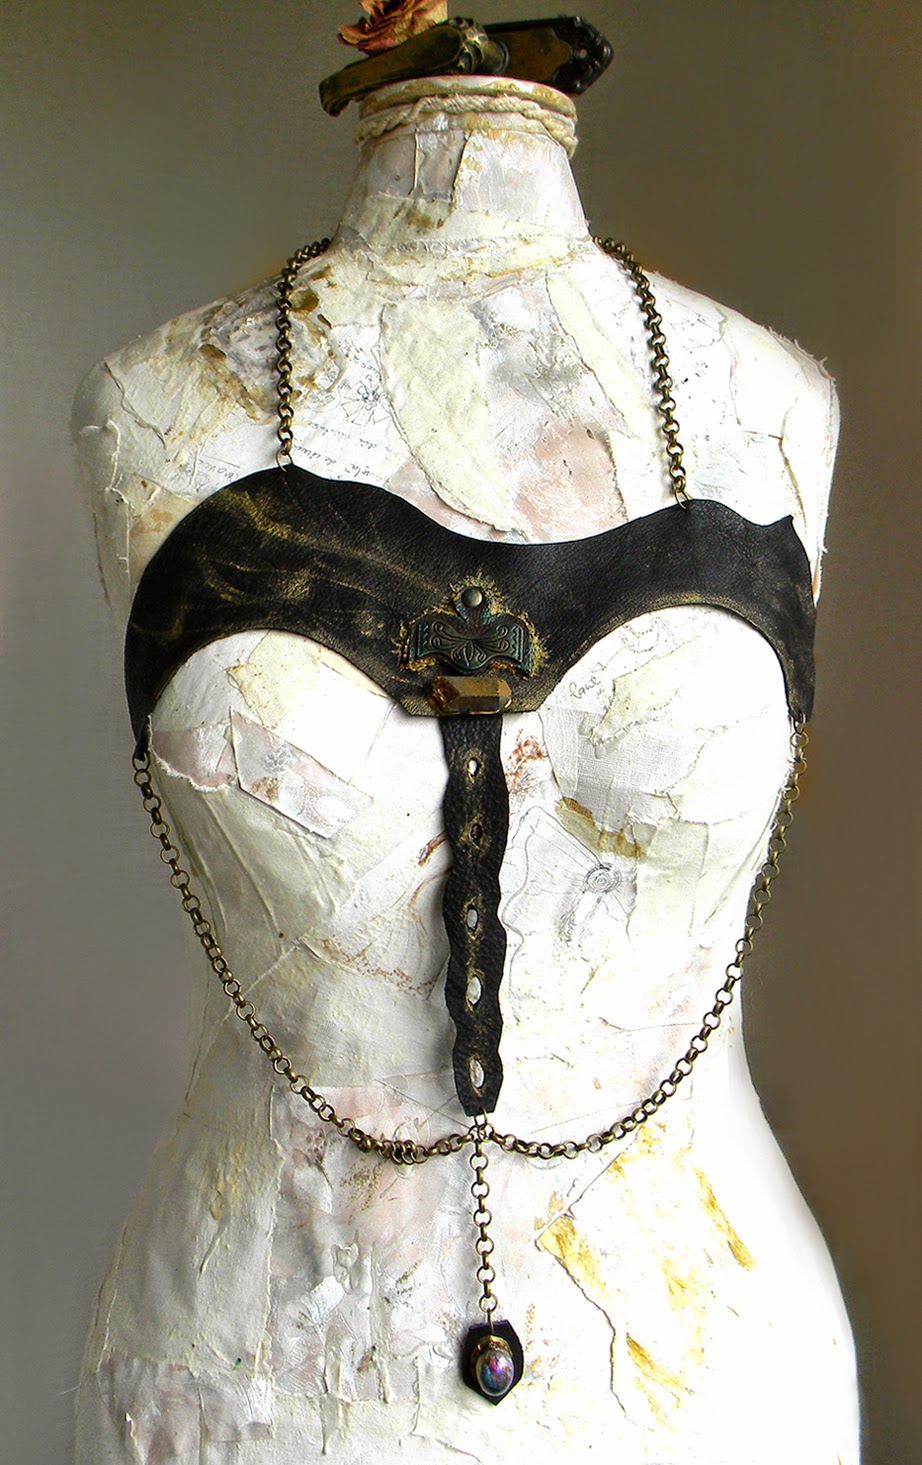 Sexy Leather Harness Statement Body Jewelry with Bronze Chains and Natural Crystal Quartz Applique